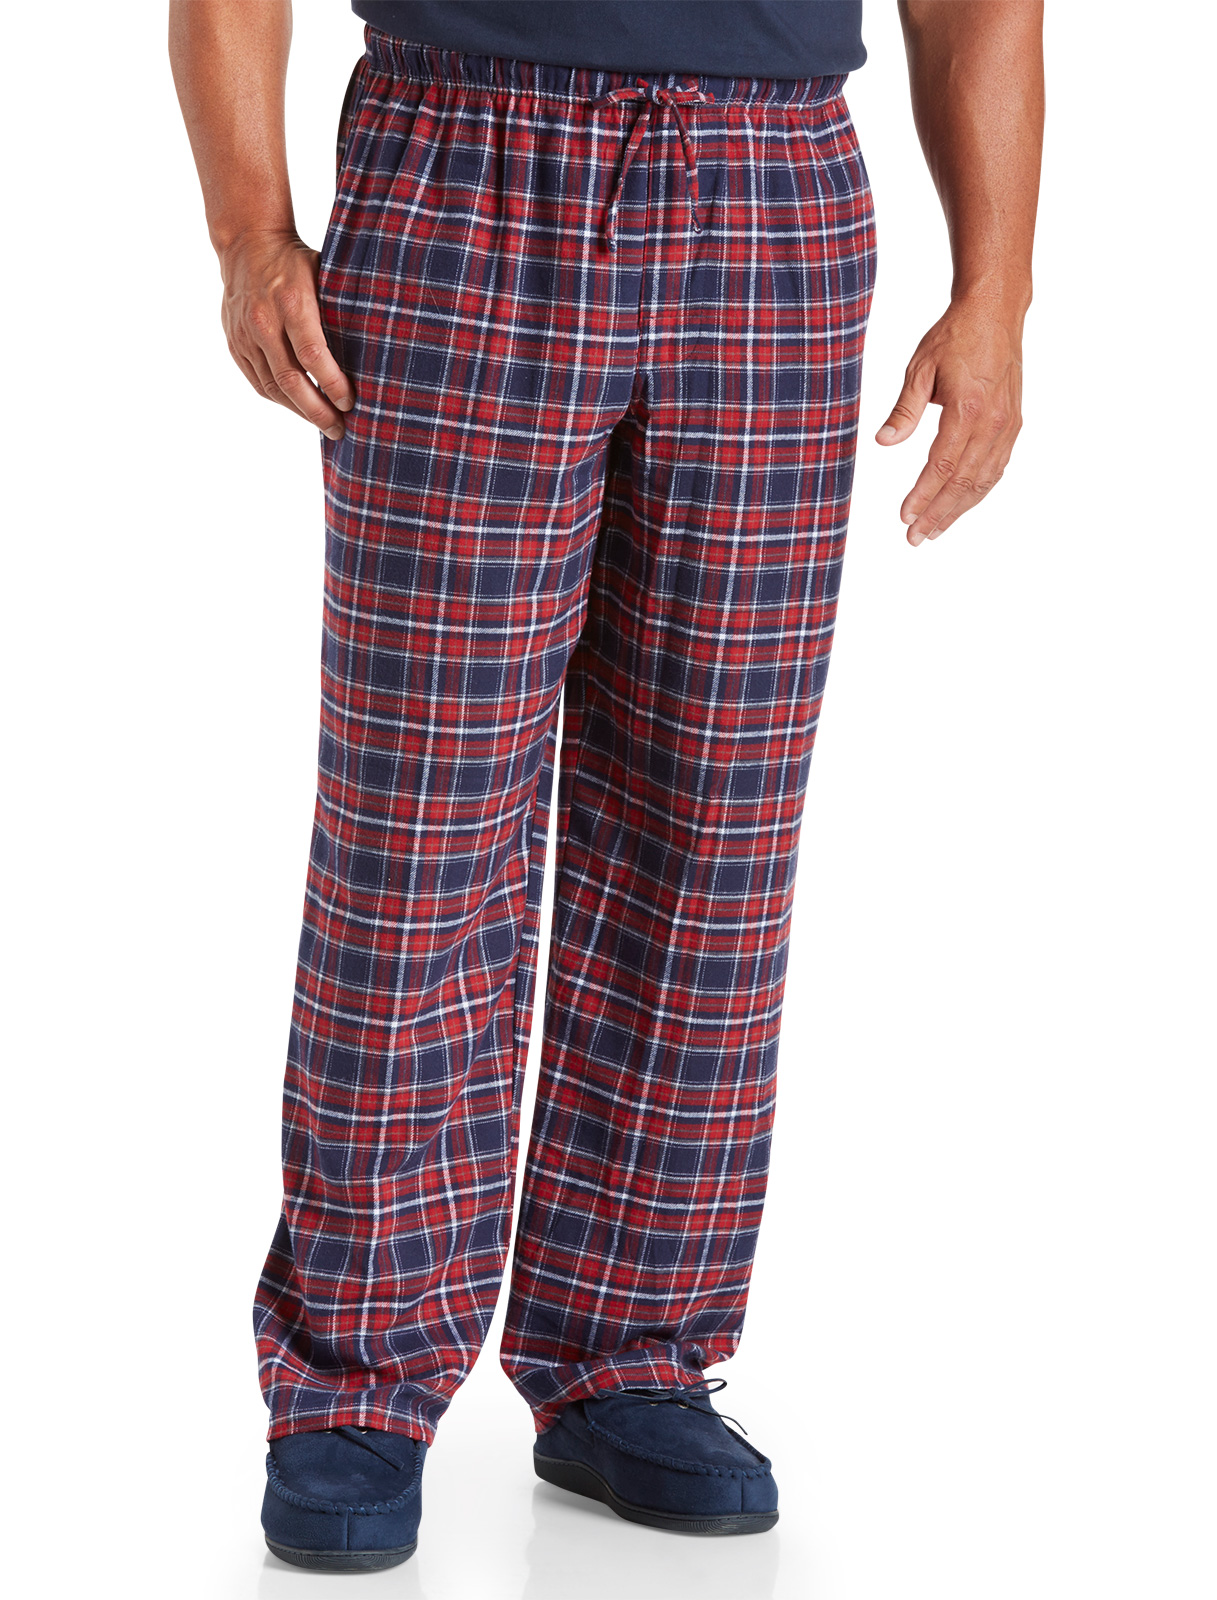 Harbor Bay Men's Big and Tall Plaid Flannel Lounge Pants